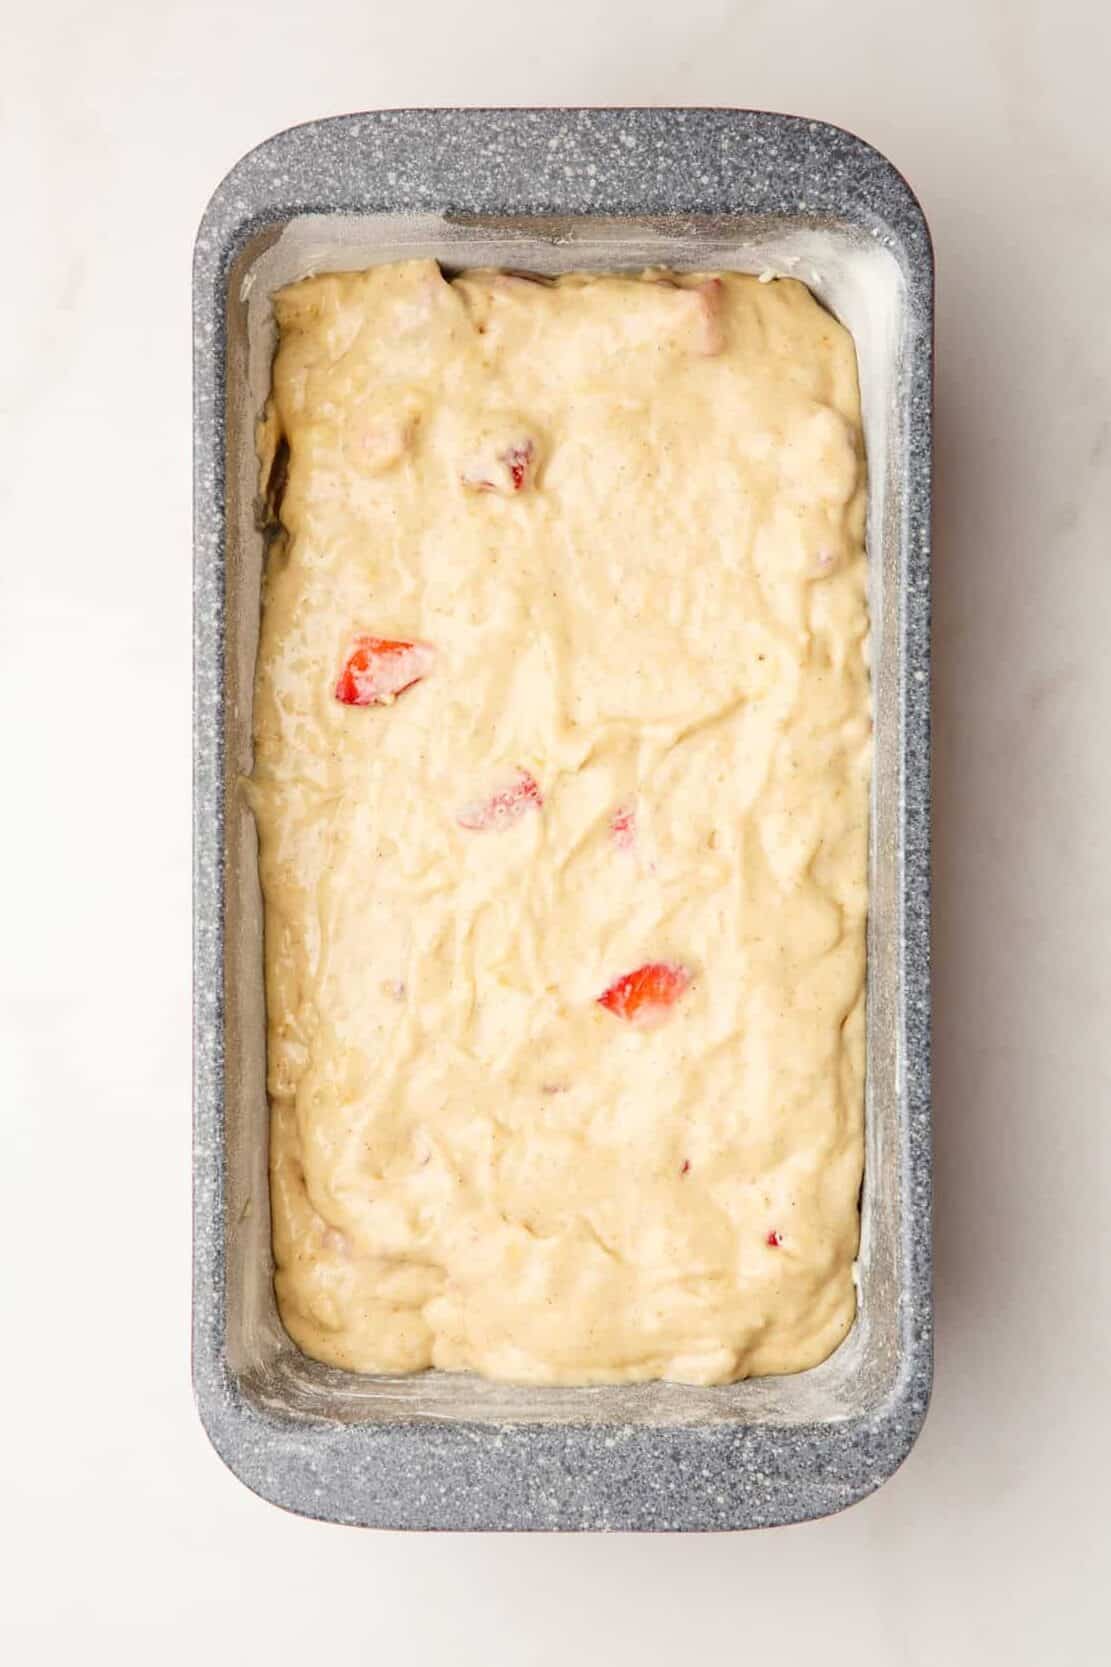 Step 4 to make strawberry banana bread, pour batter into a prepared 9x13-inch loaf pan.